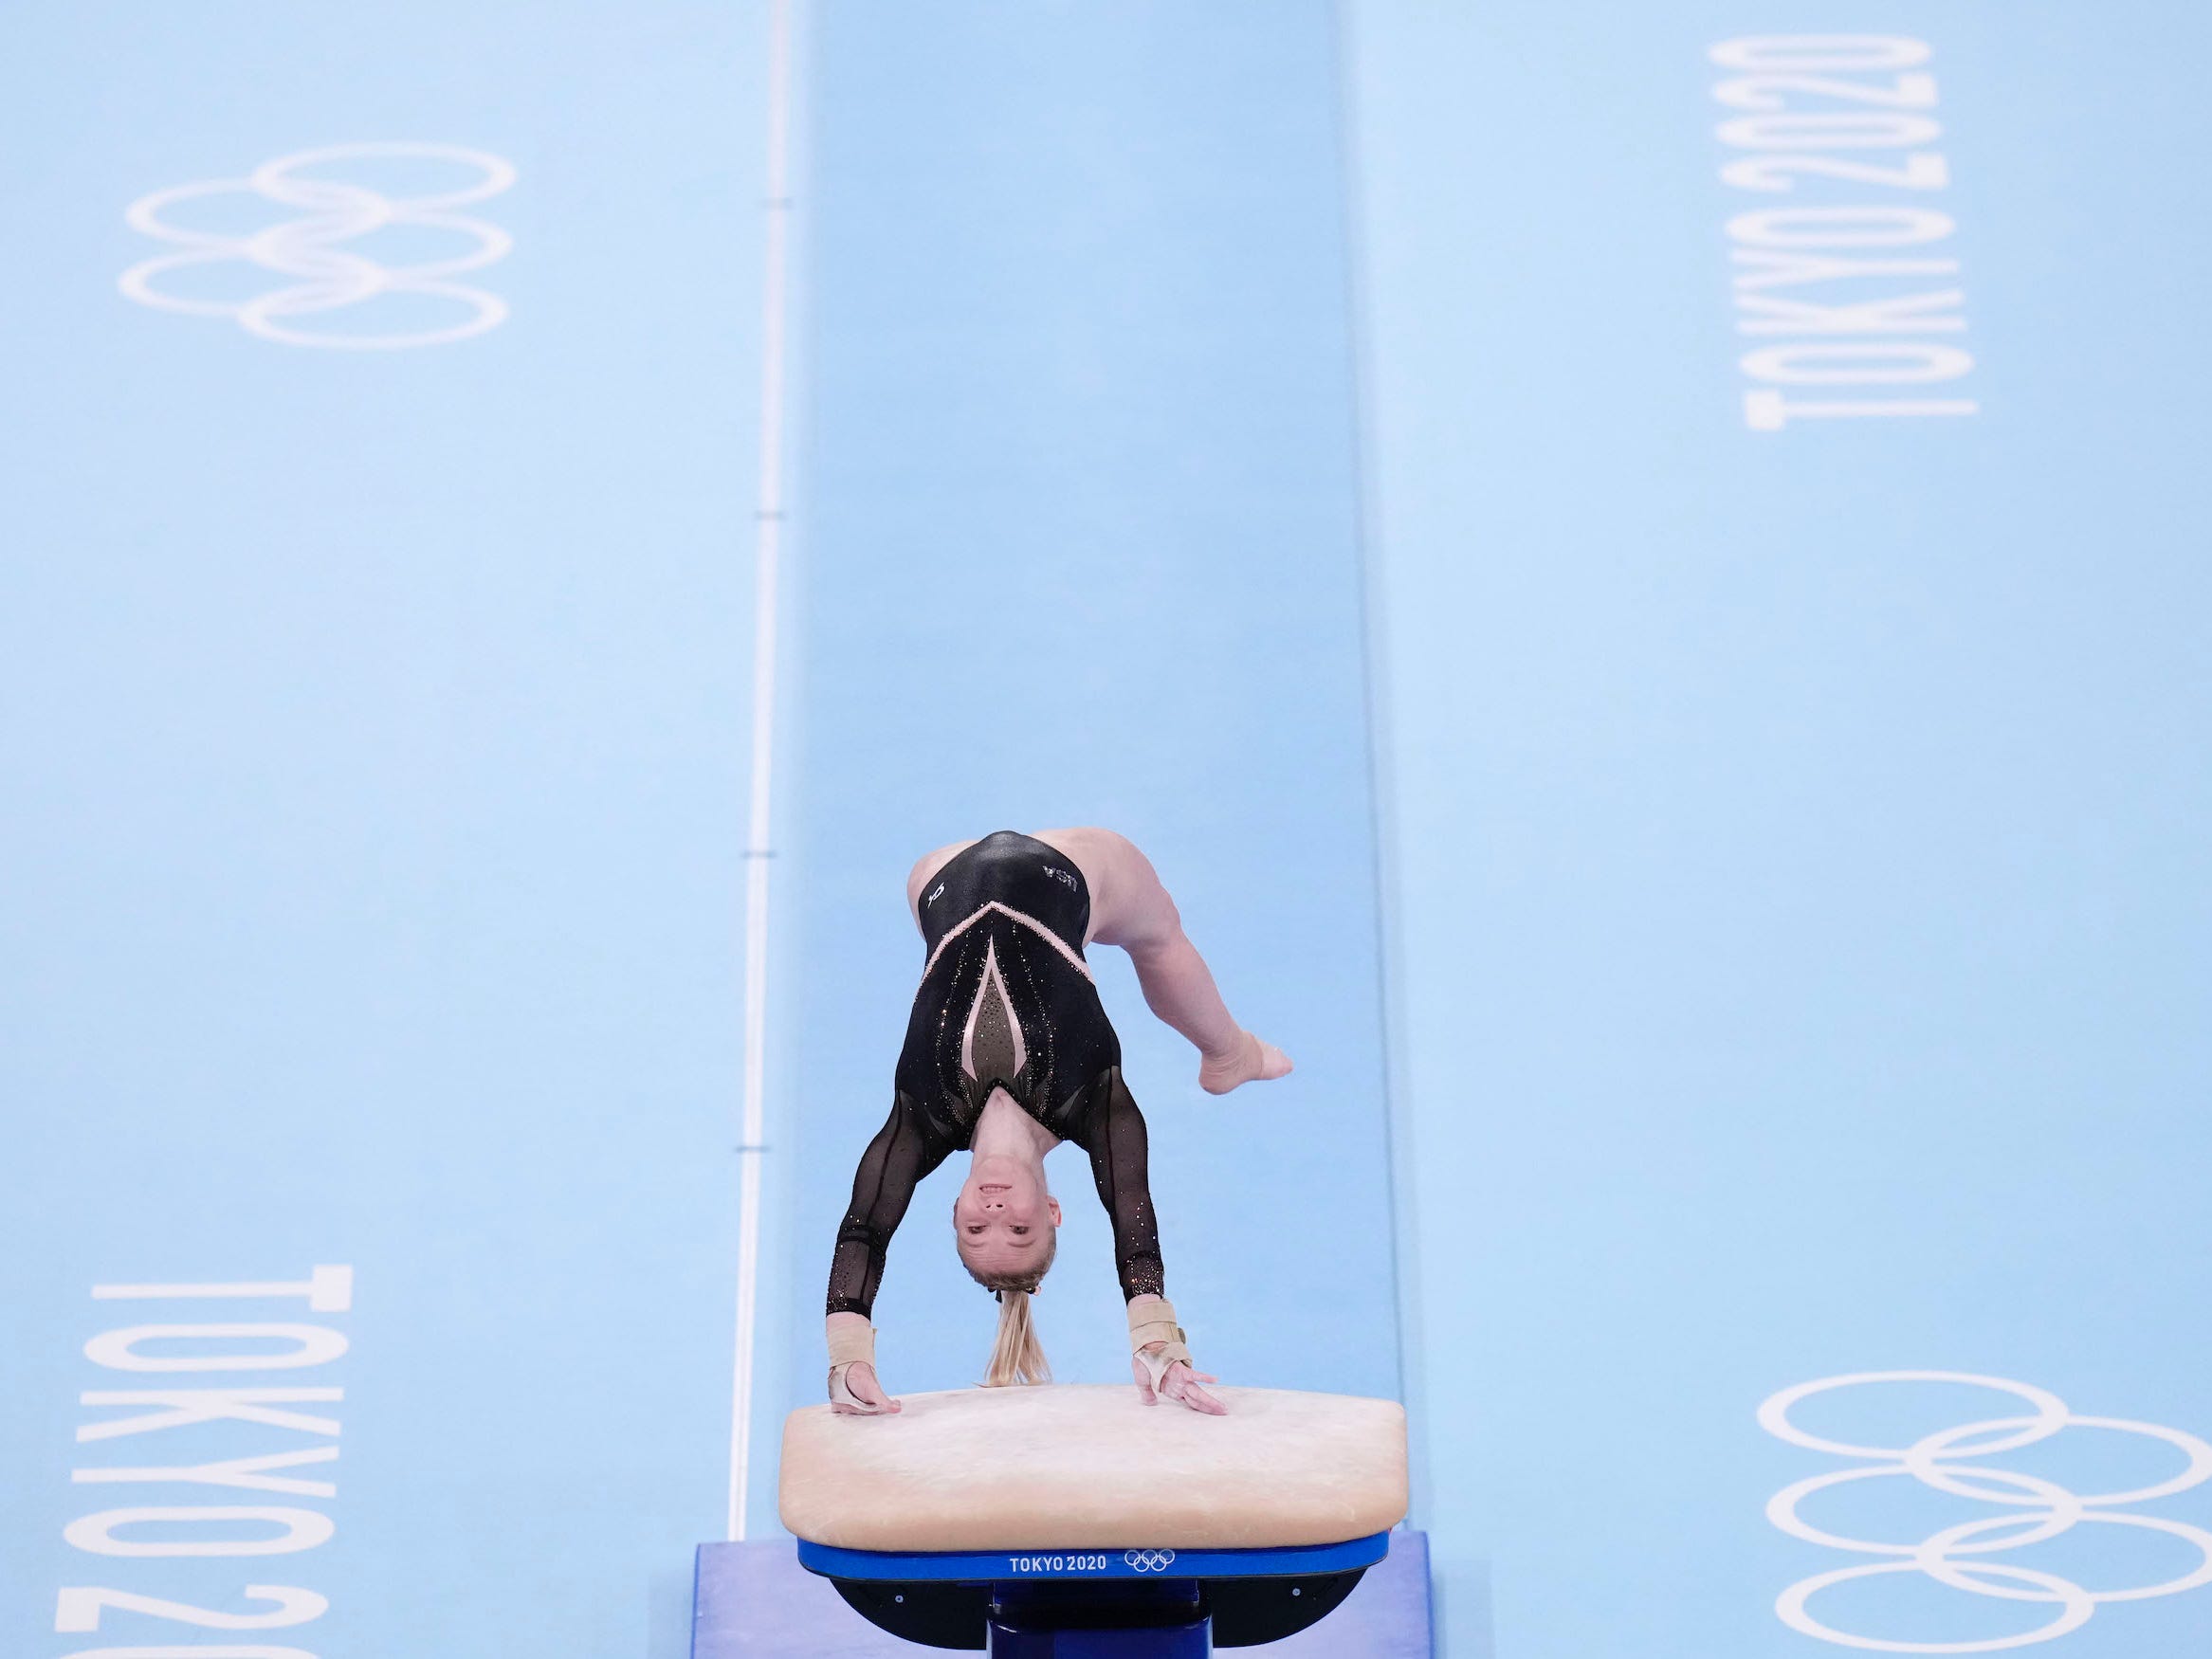 Jade Carey competes in the vault final at the Tokyo Olympics.